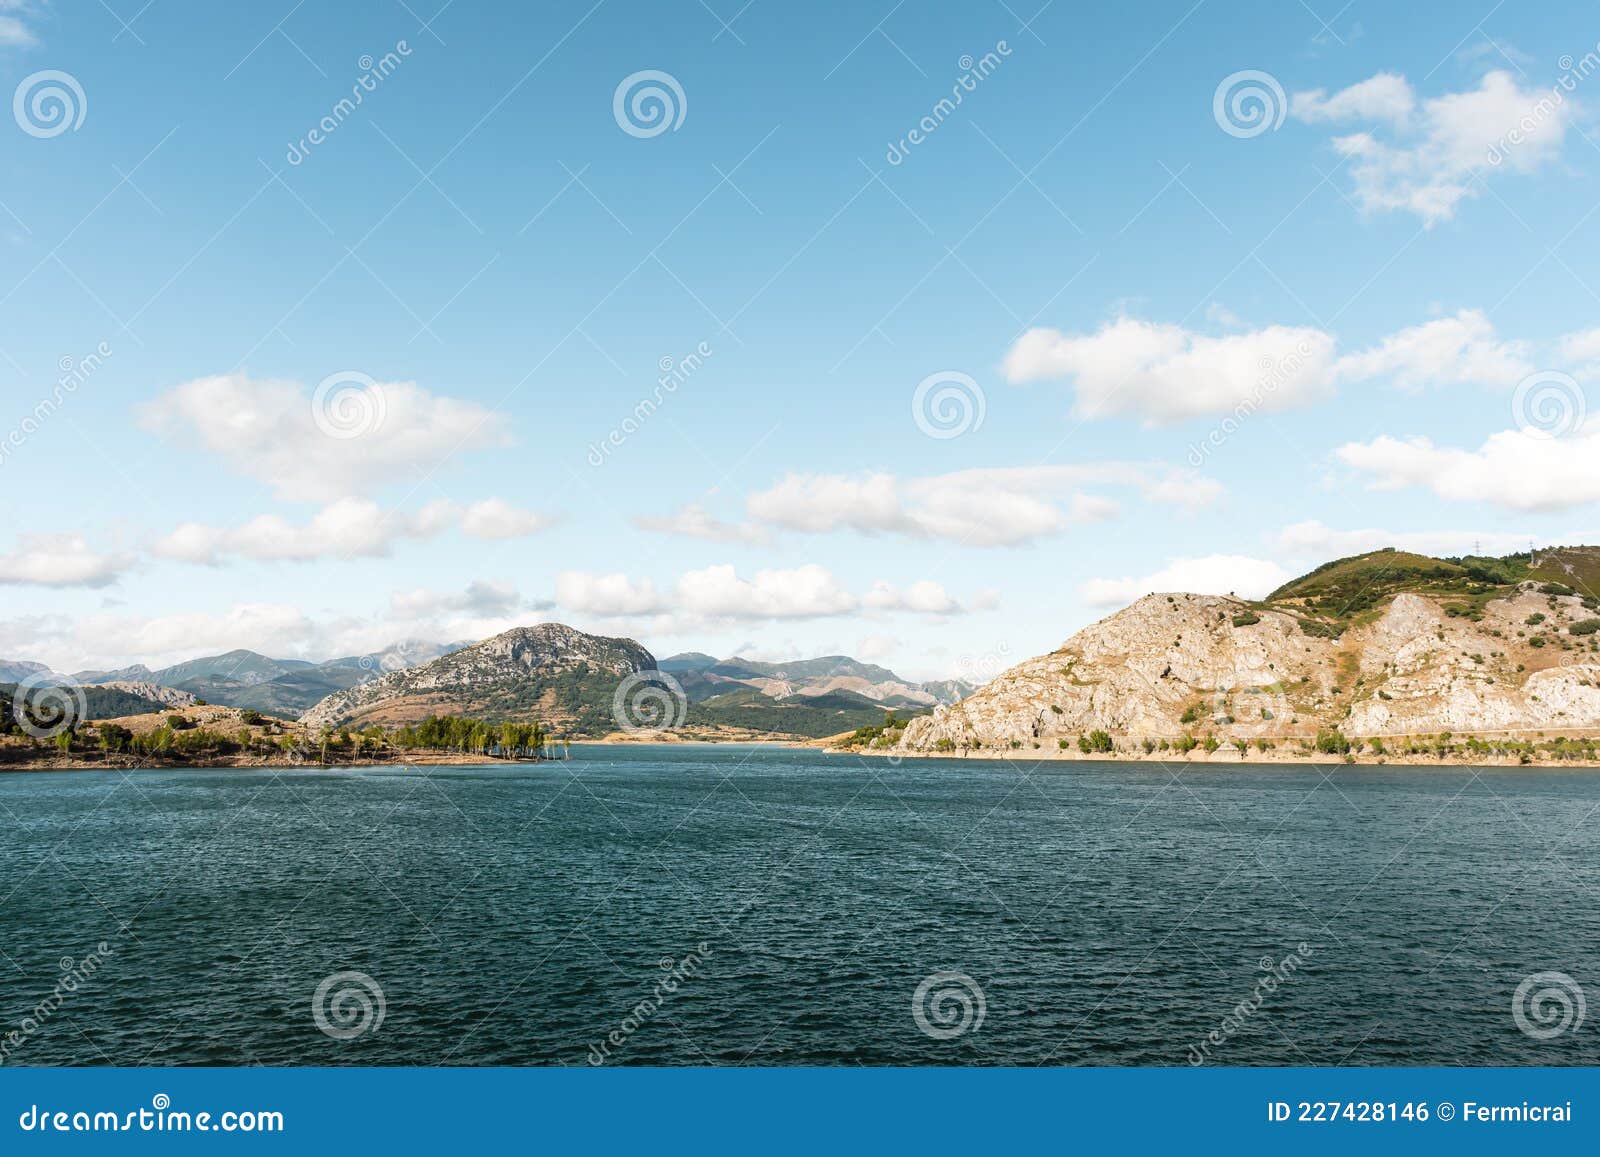 landscape of the mountains and the water of the porma reservoir in castilla y leon in spain.the photo has a blue sky with some